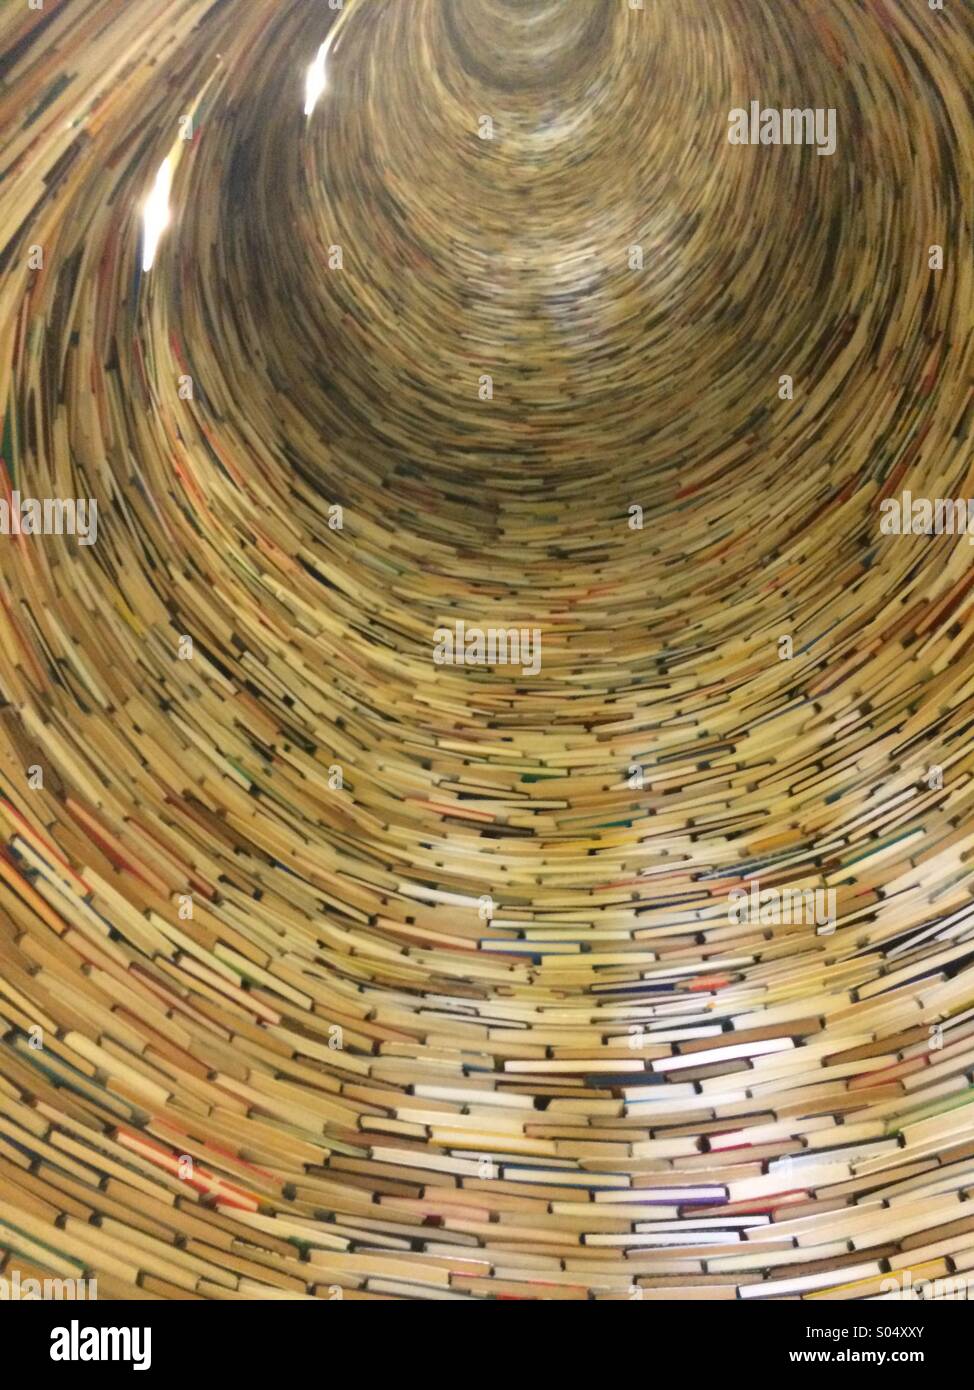 Tunnel of books Stock Photo